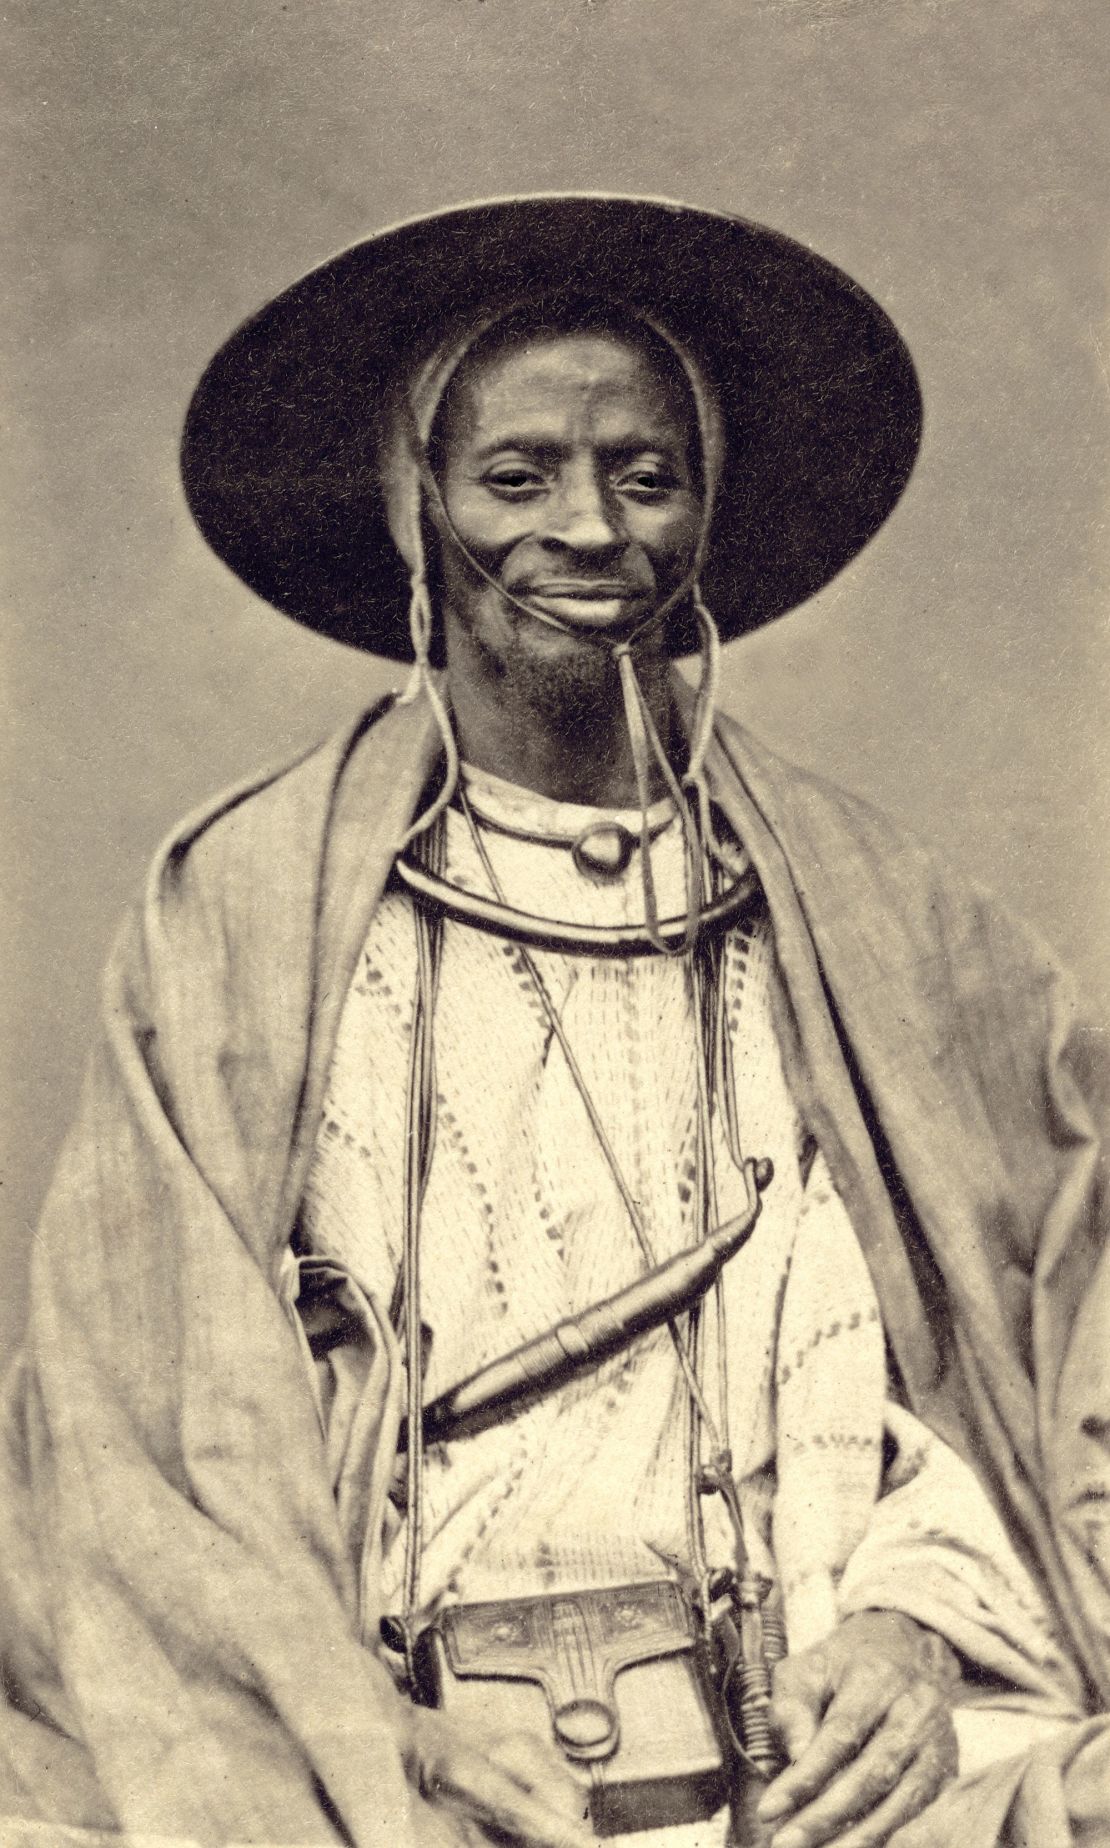 A copy of a portrait presented to Belgian traveller Adolphe Burdo in 1878 by a man described by Burdo as "The King of Dakar."